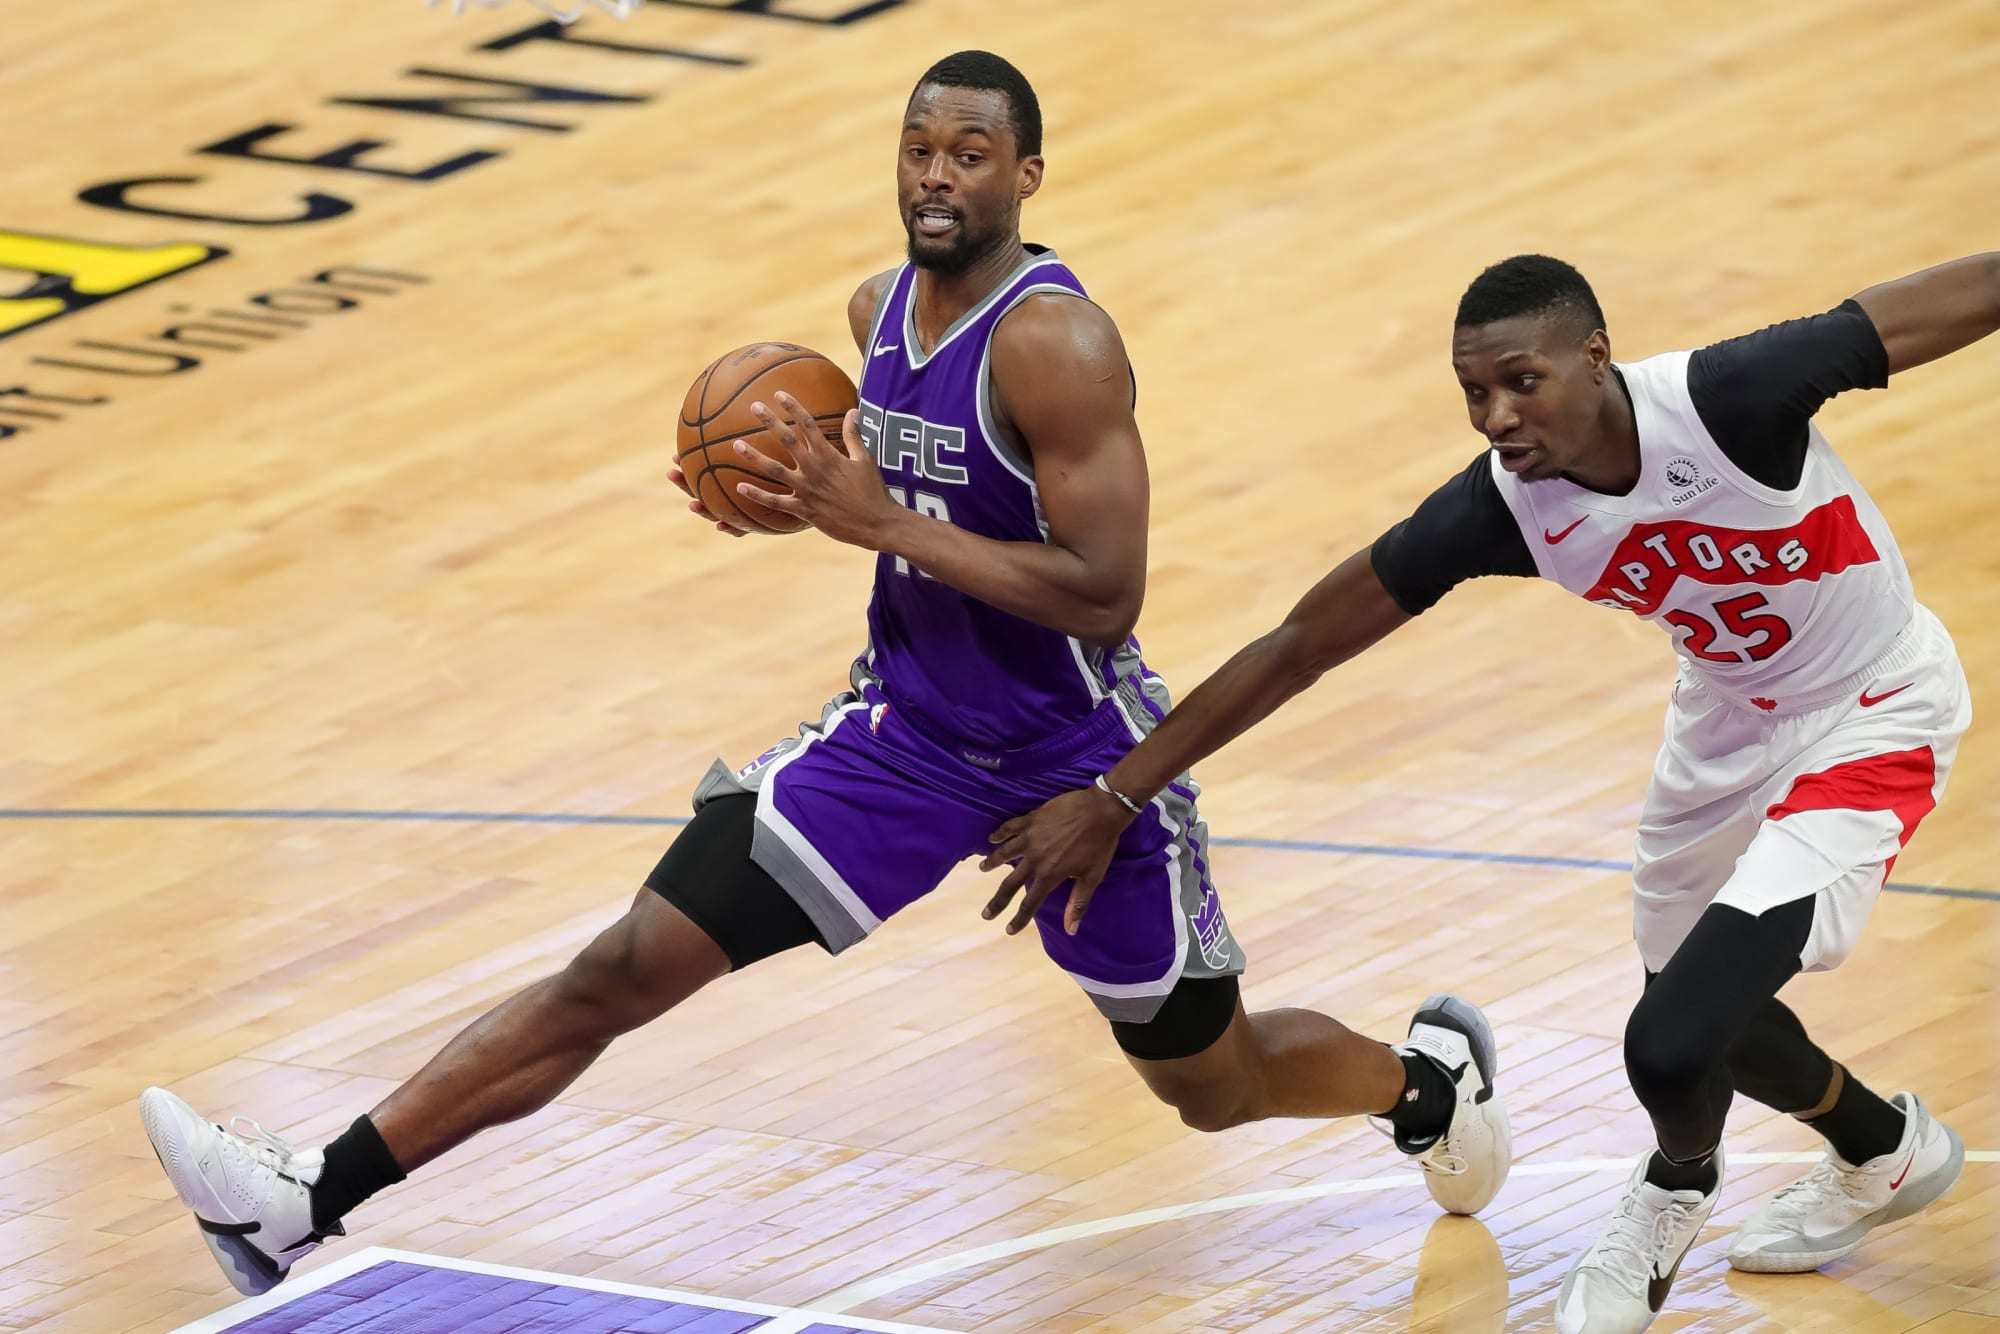 Harrison Barnes Expecting Child With Wife Brittany - Tar Heel Times -  7/20/2021